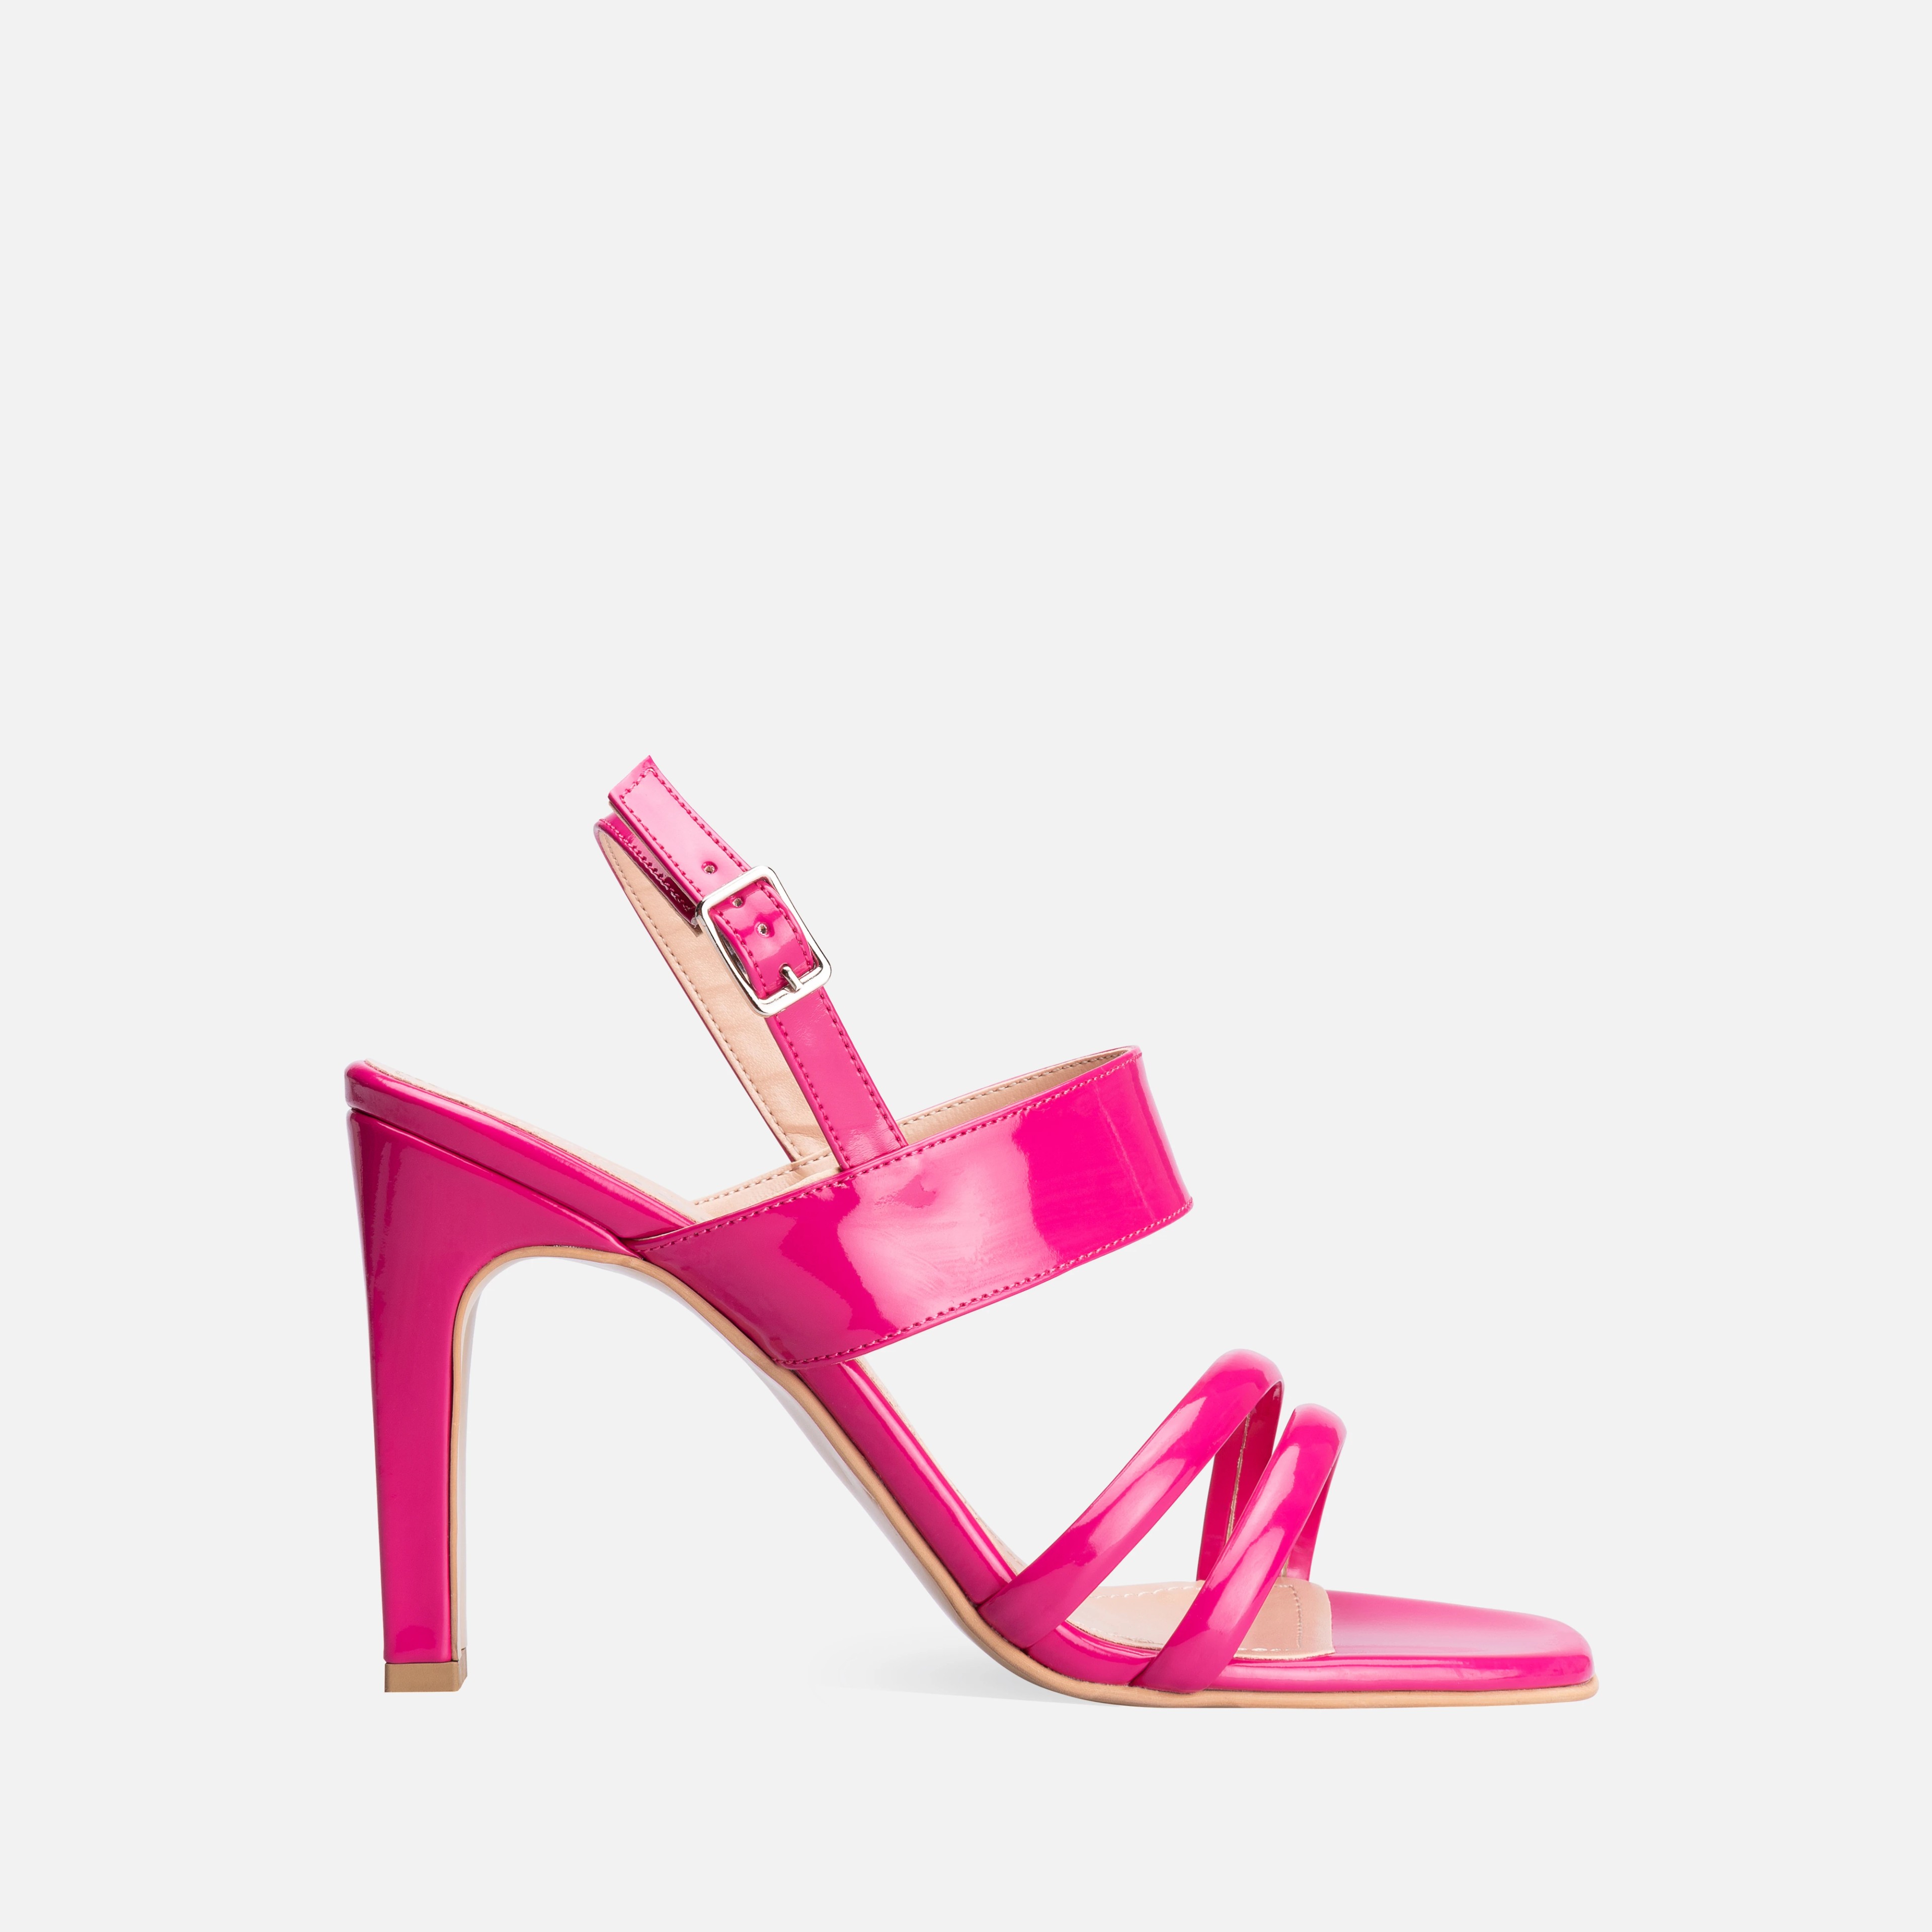 Patent Leather Thick High-Heeled Shoes - Fuchsia Color